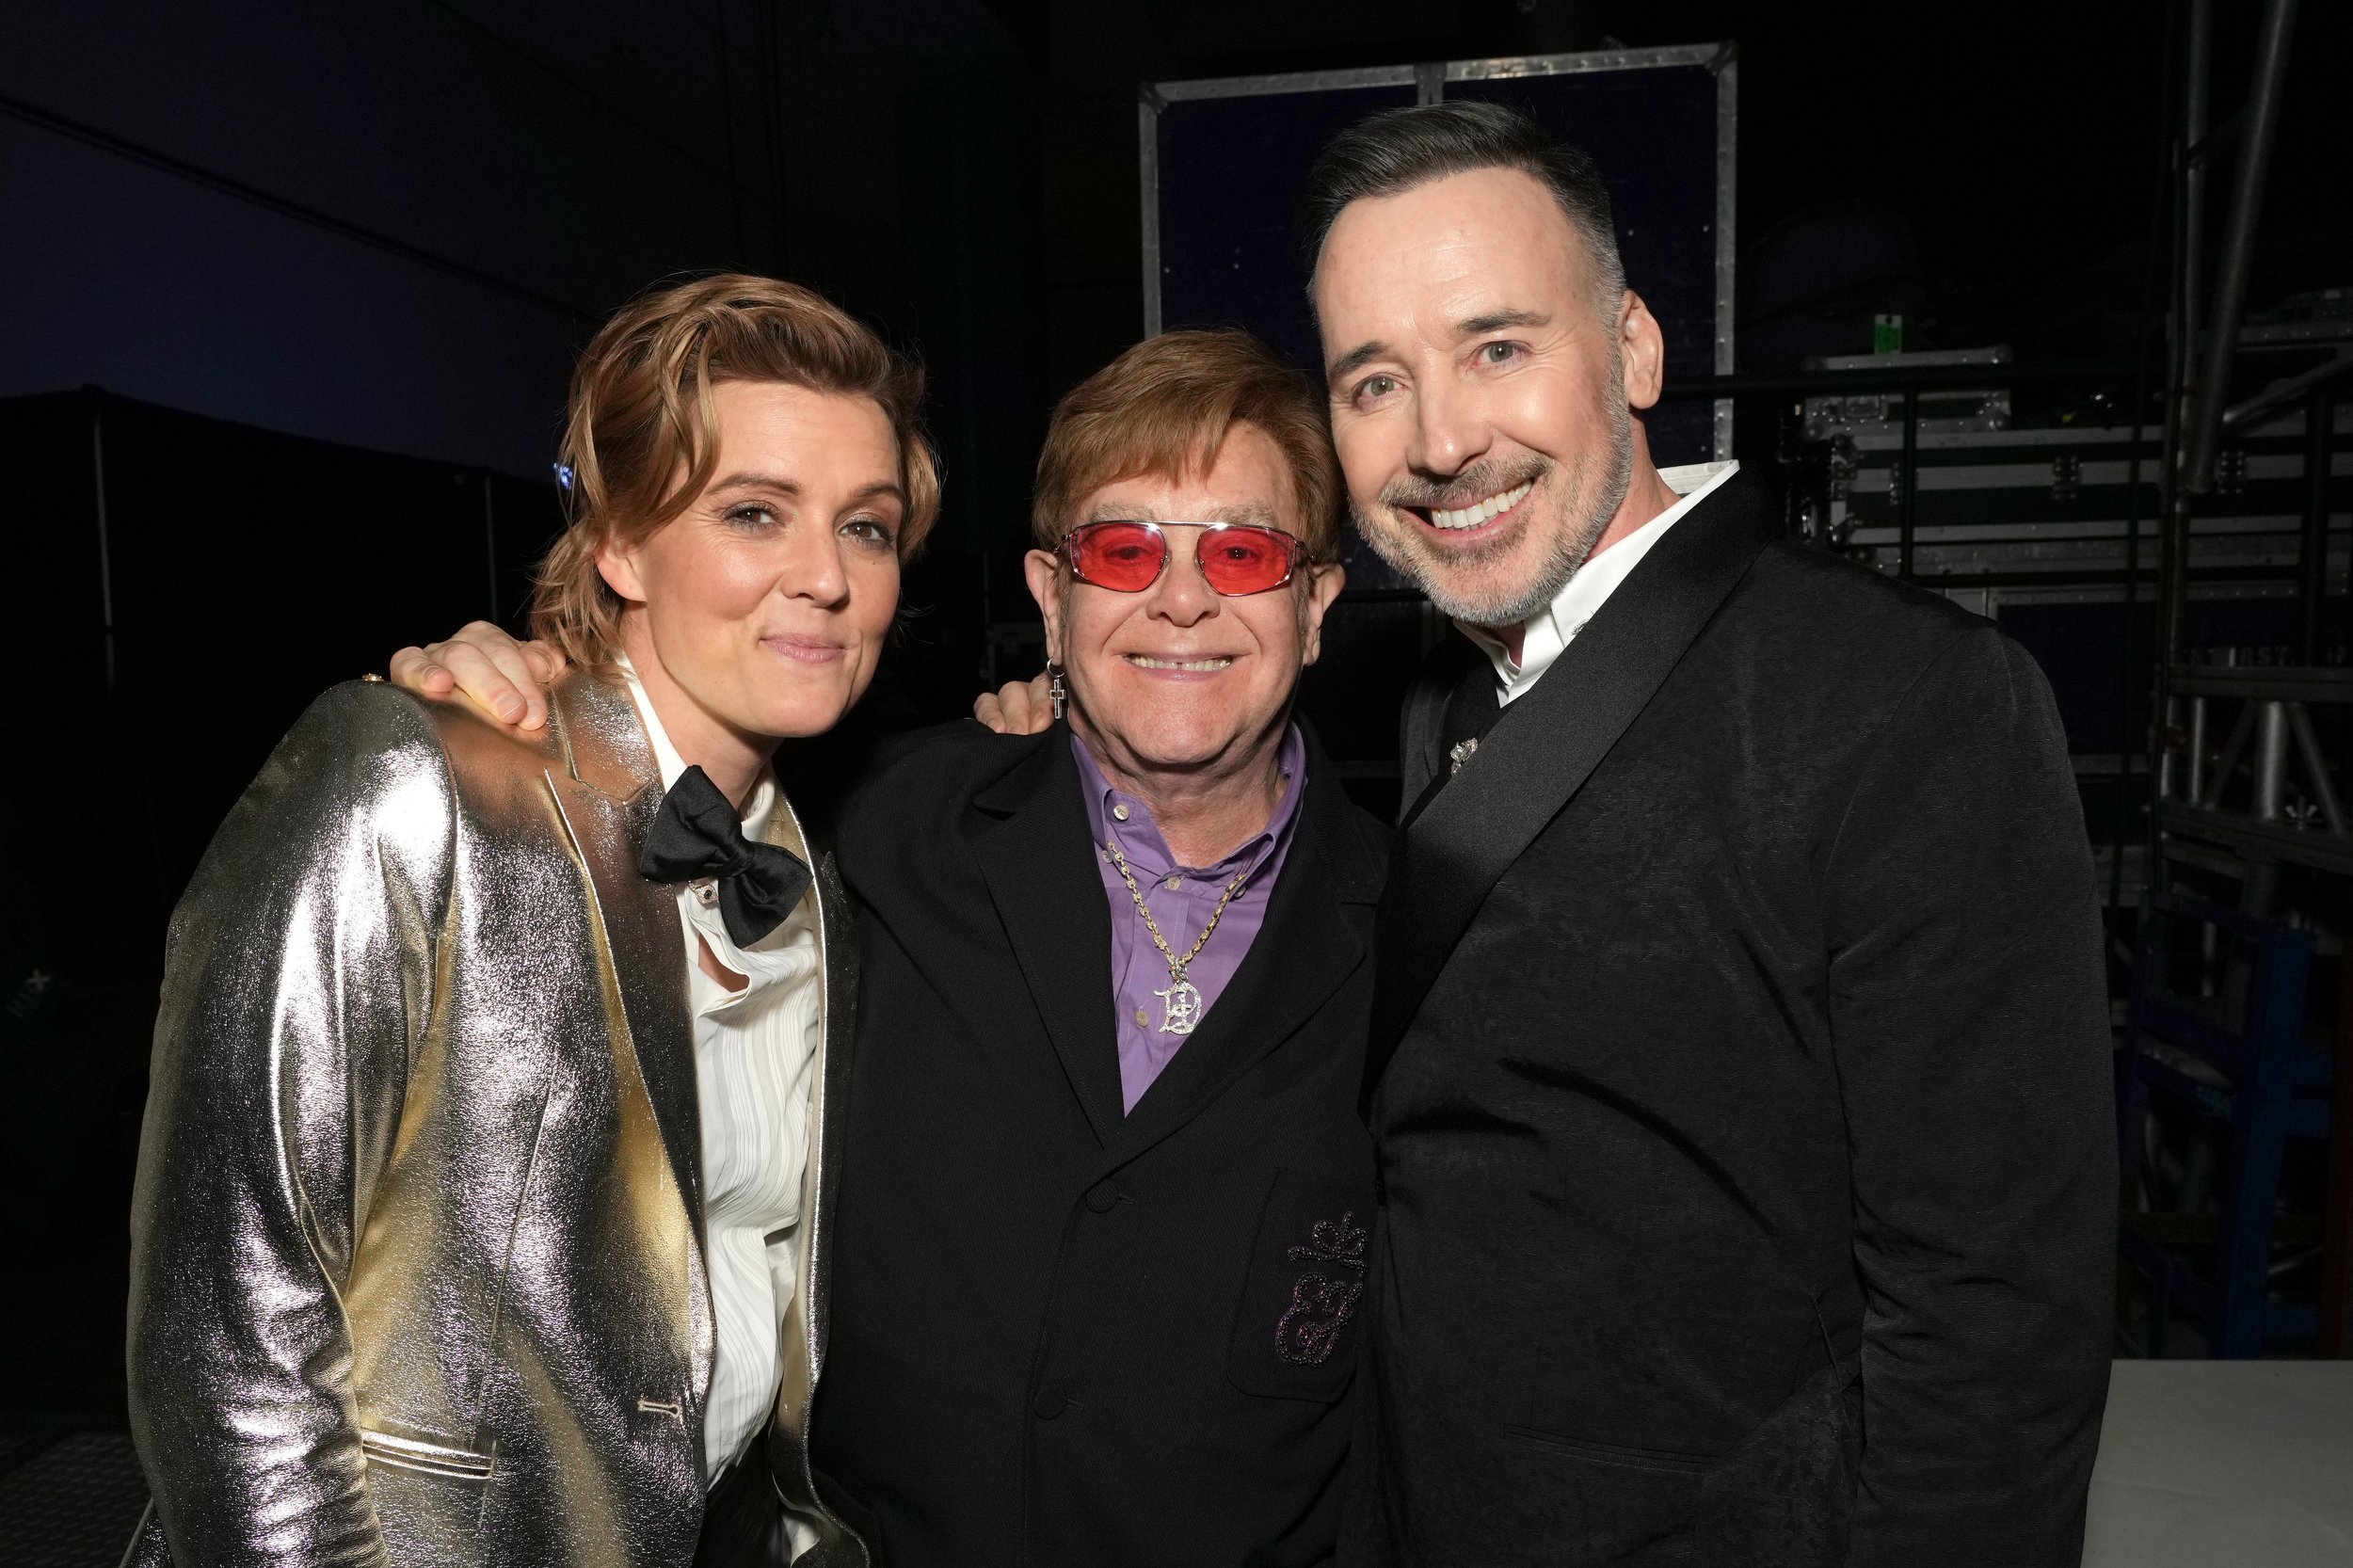  LOS ANGELES, CALIFORNIA - FEBRUARY 03: (L-R) Brandi Carlile, Elton John, and David Furnish attend MusiCares Persons of the Year Honoring Berry Gordy and Smokey Robinson at Los Angeles Convention Center on February 03, 2023 in Los Angeles, California